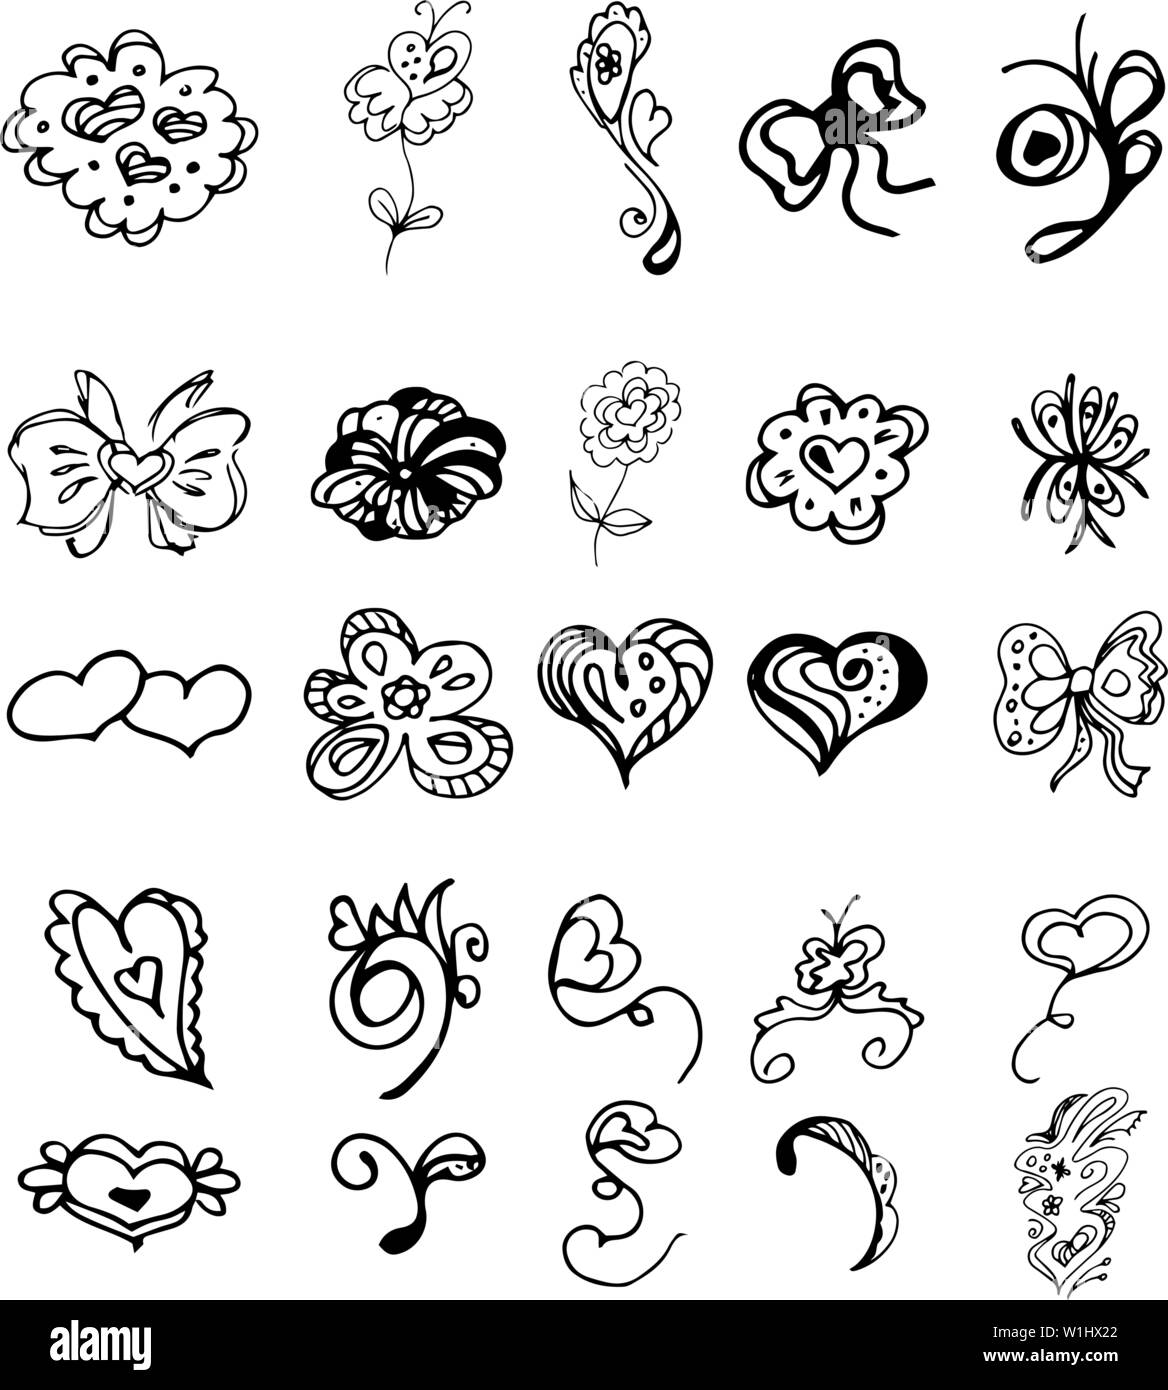 Download Flowers And Hearts Hand Drawn Doodle Collection Isolated On White Background 25 Floral Graphic Elements Big Vector Set Outline Collection Stock Vector Image Art Alamy